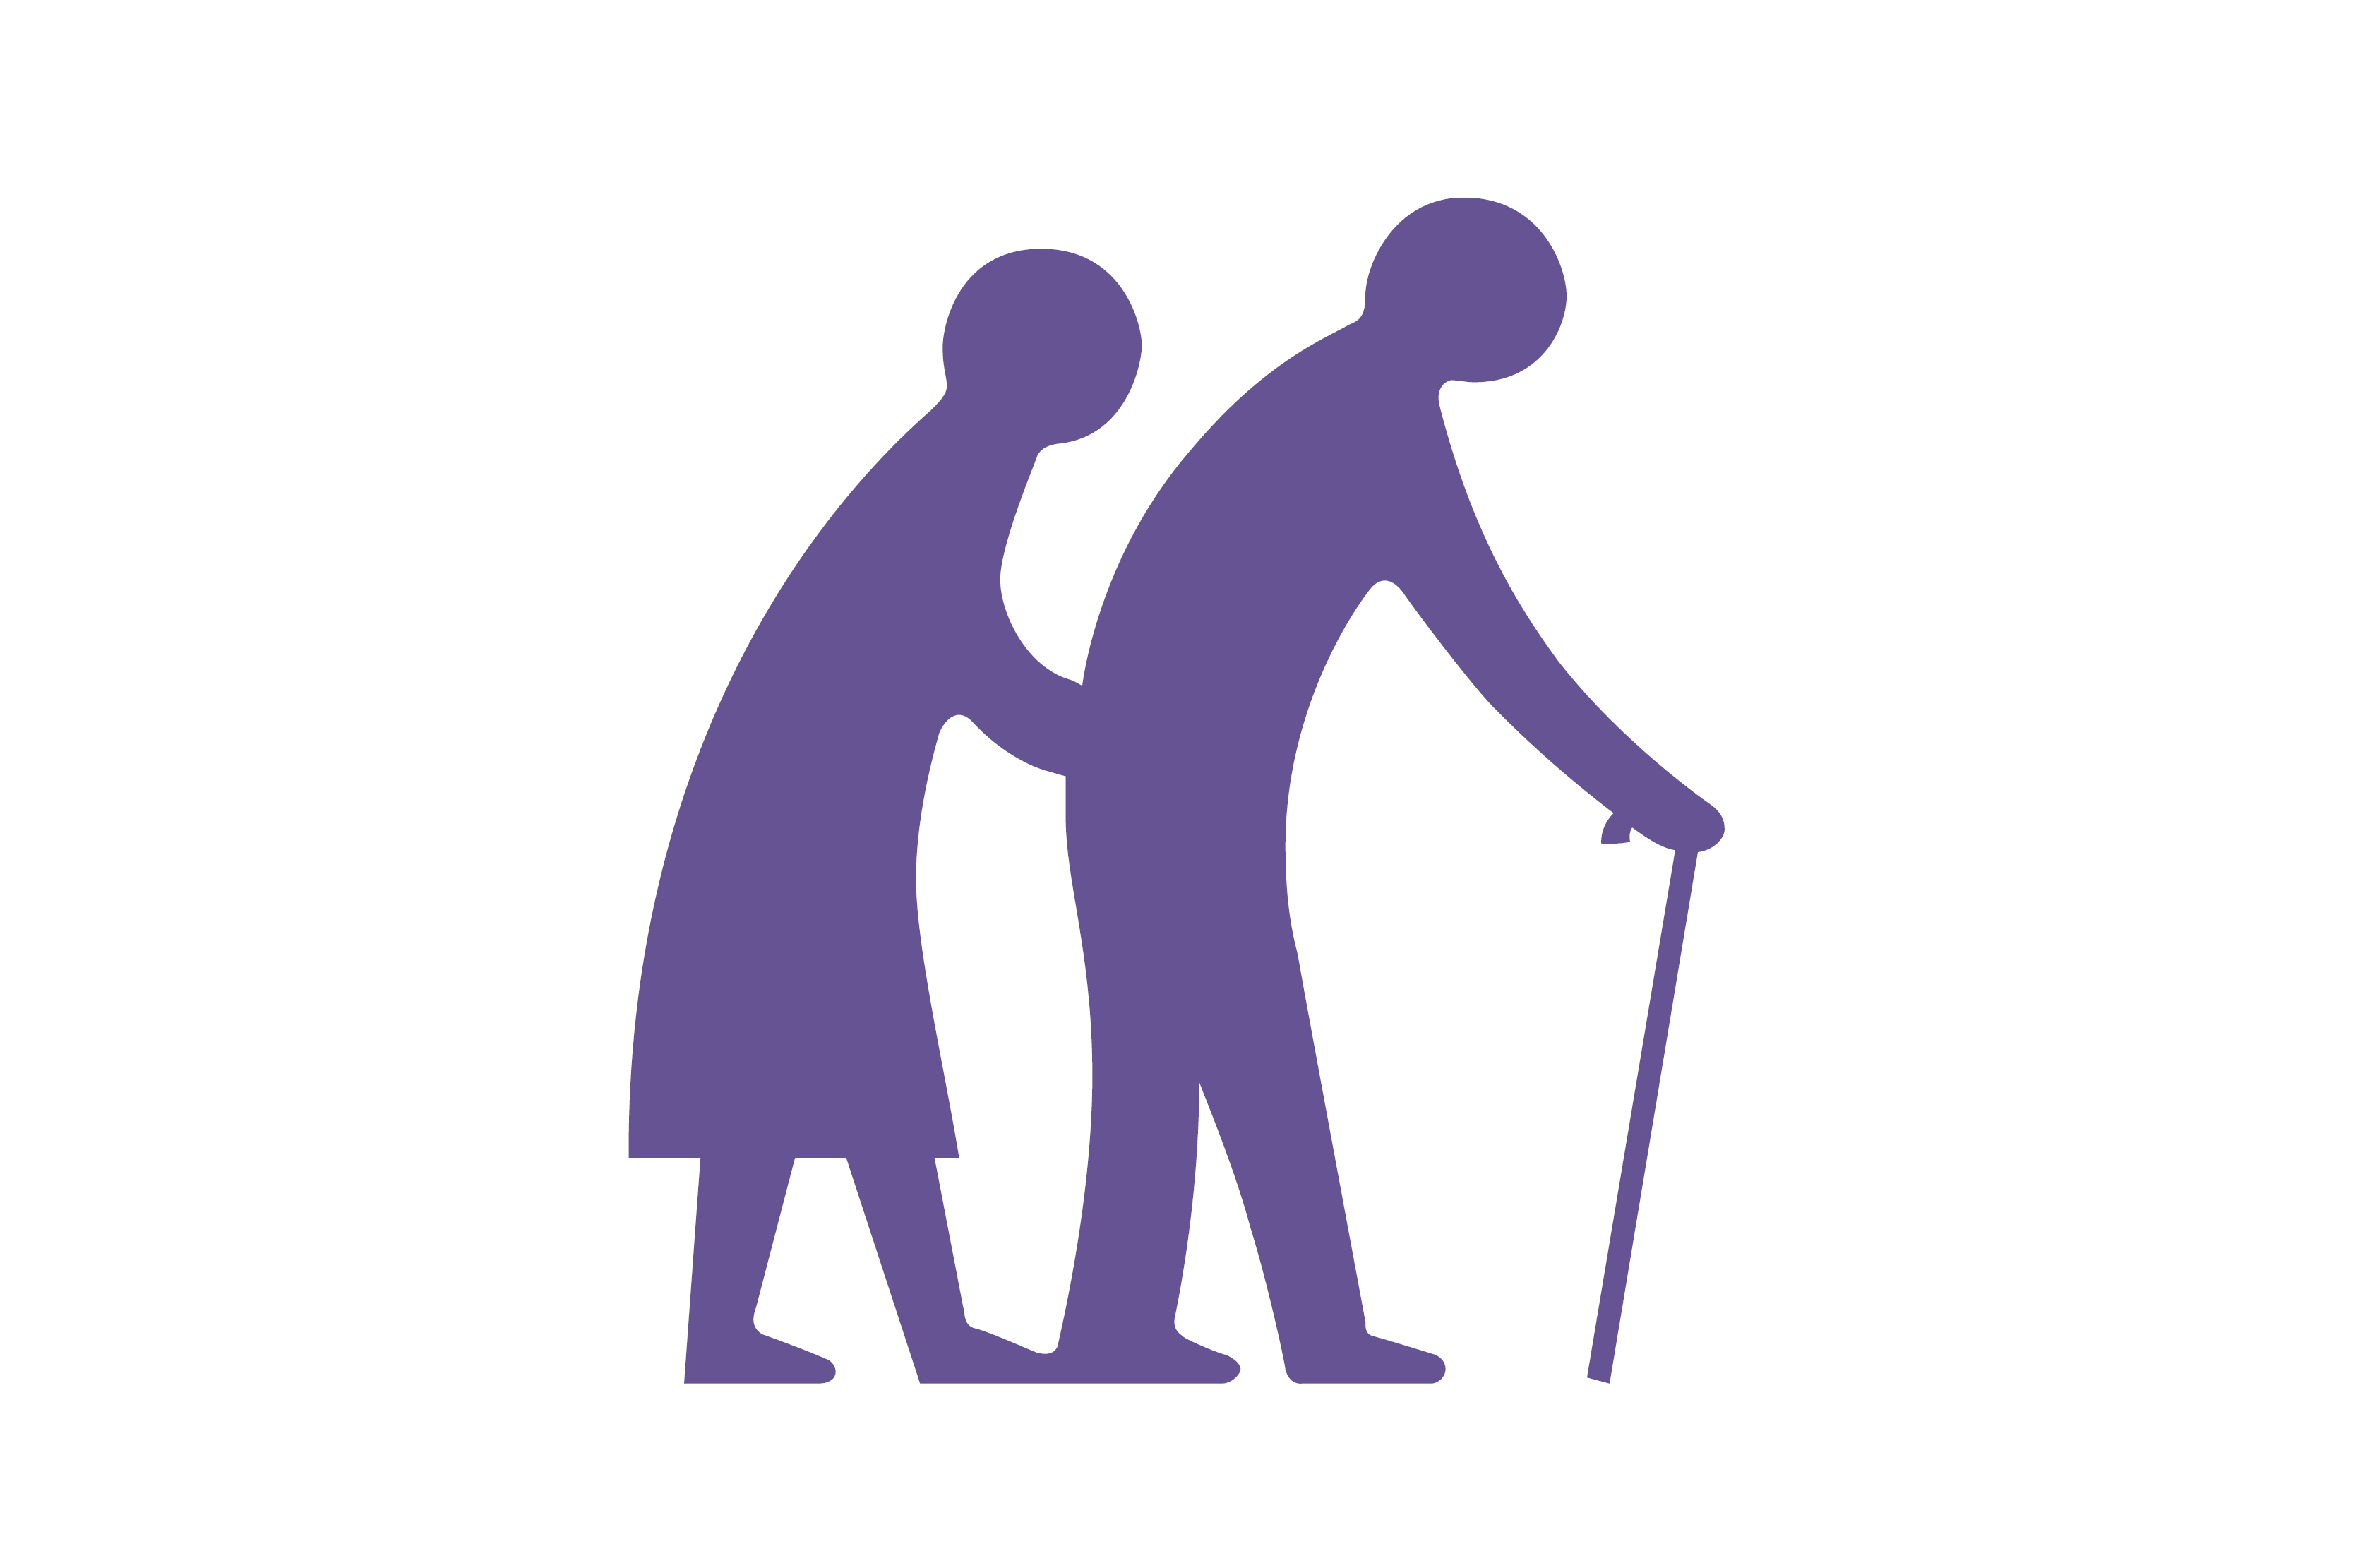 An icon of an elderly couple walking. The man is holding a cane.